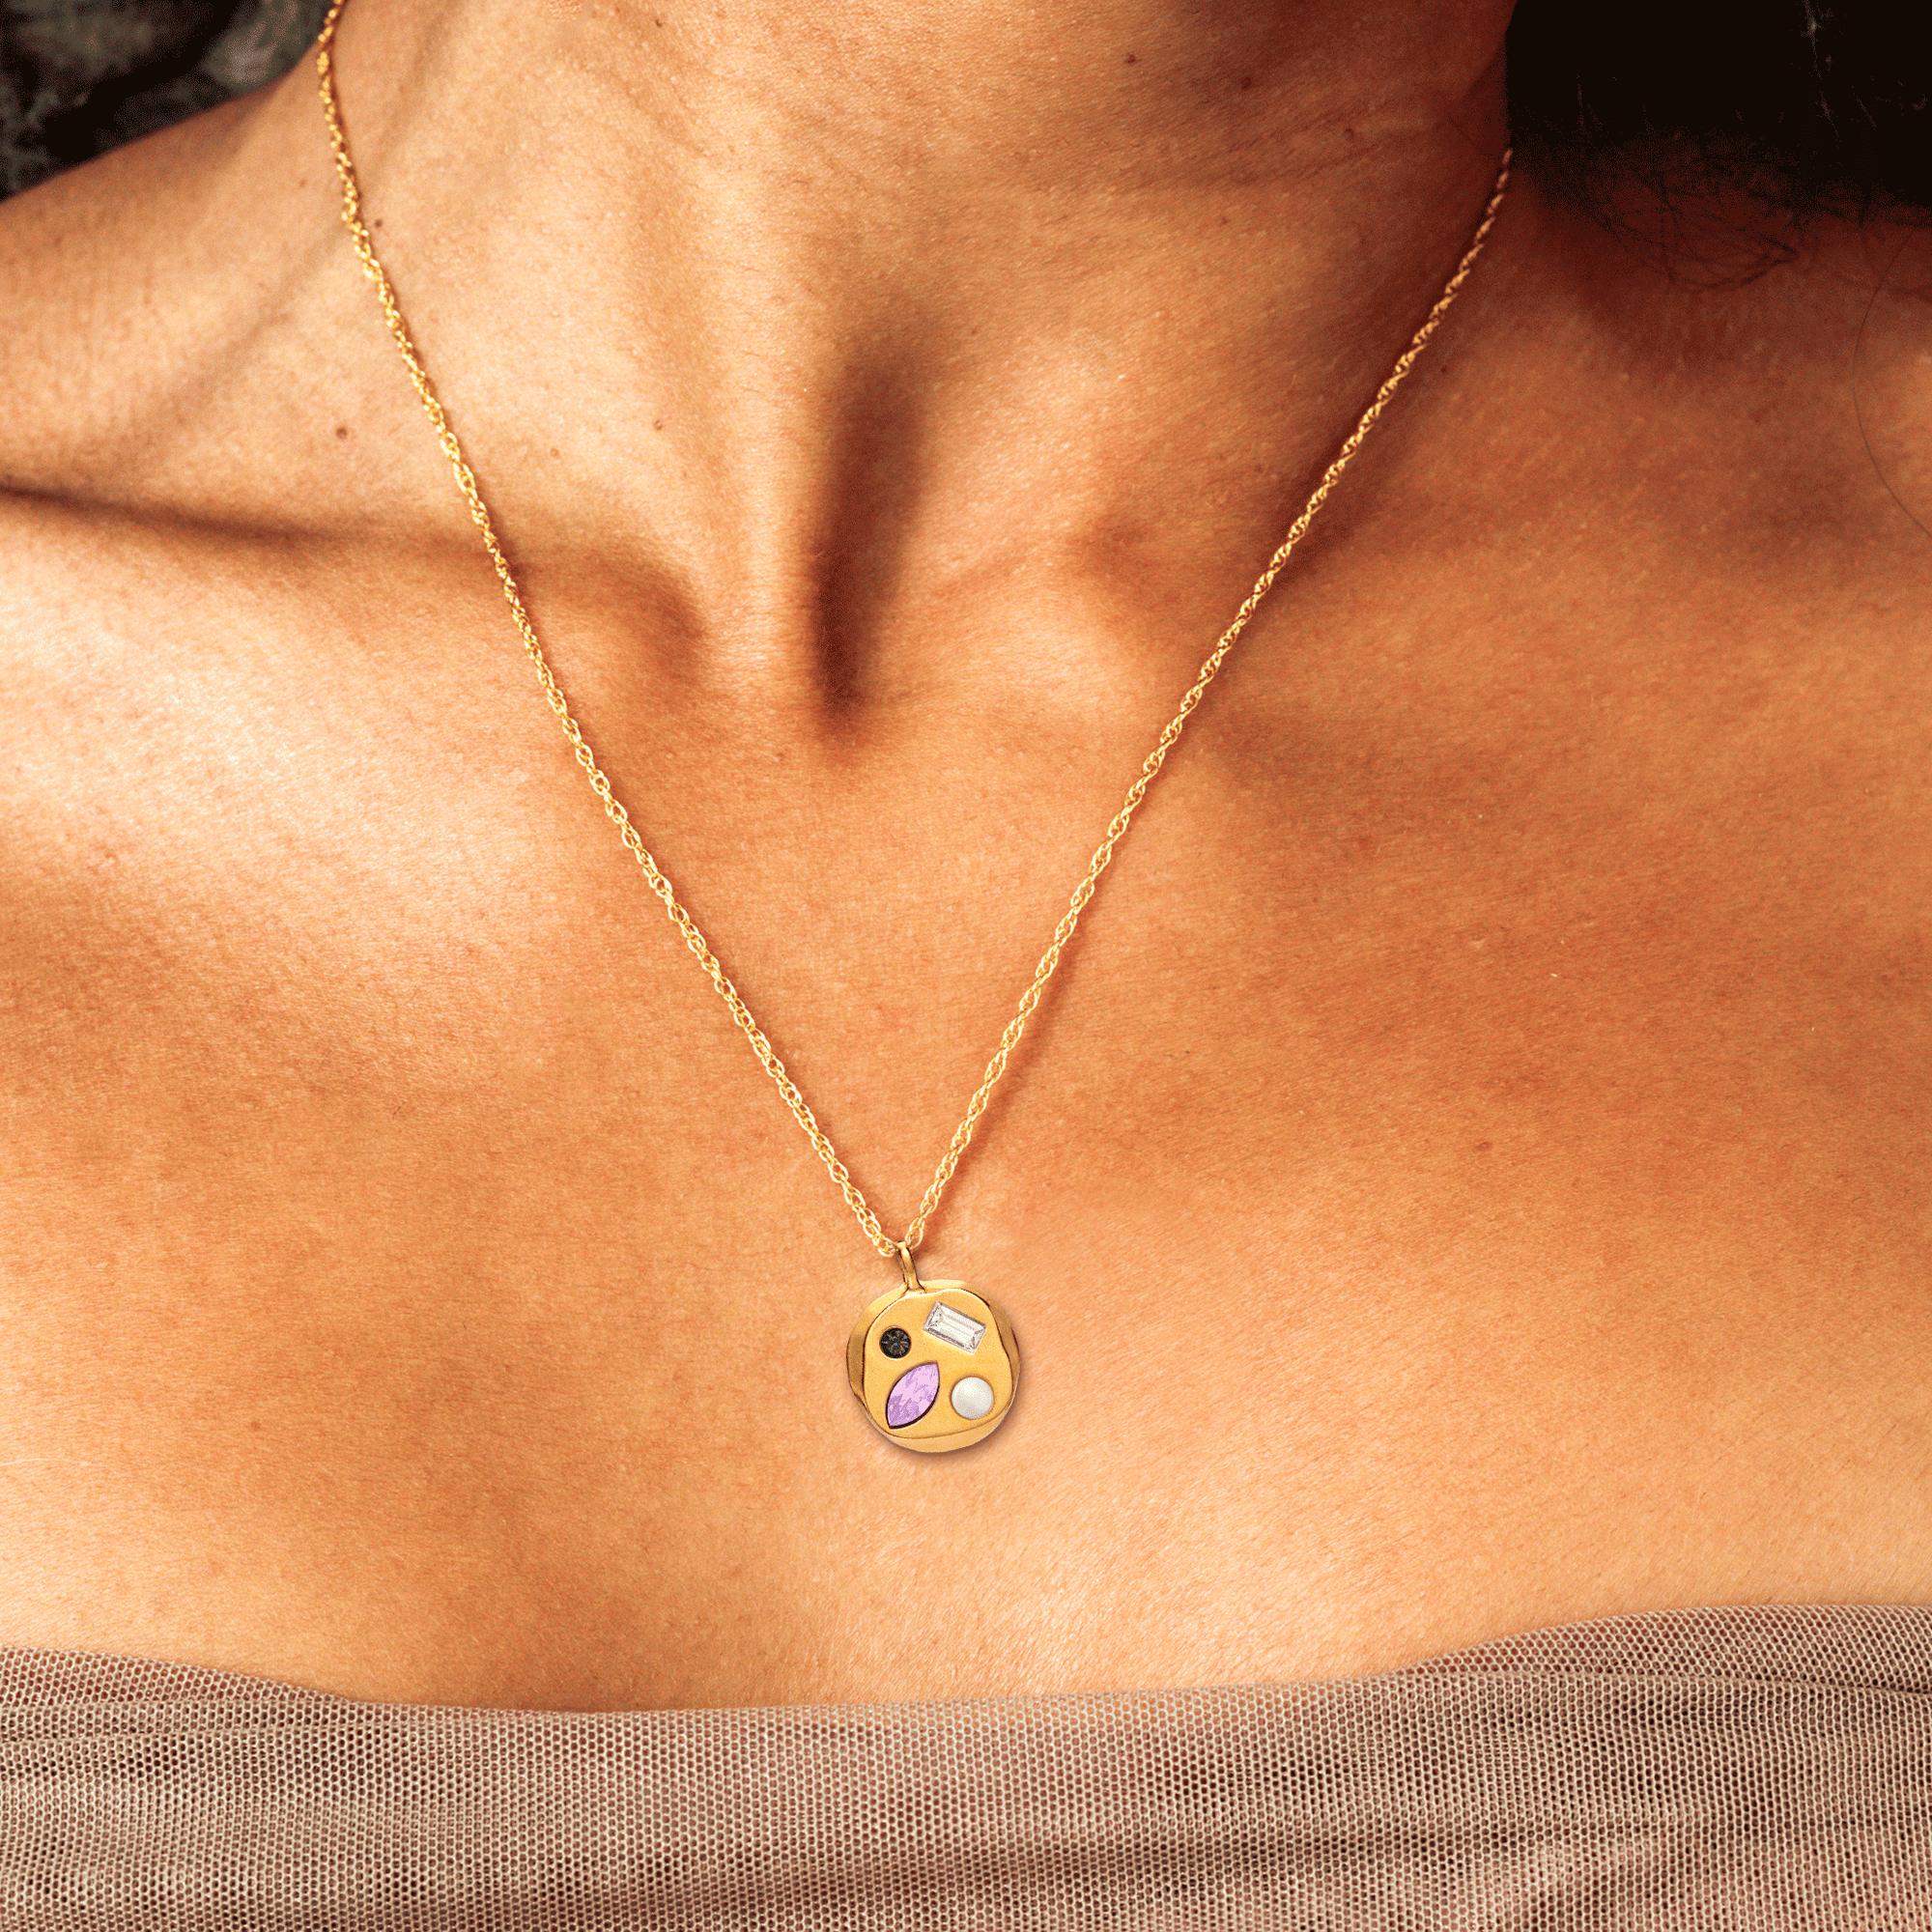 Person wearing The June Thirtieth Pendant